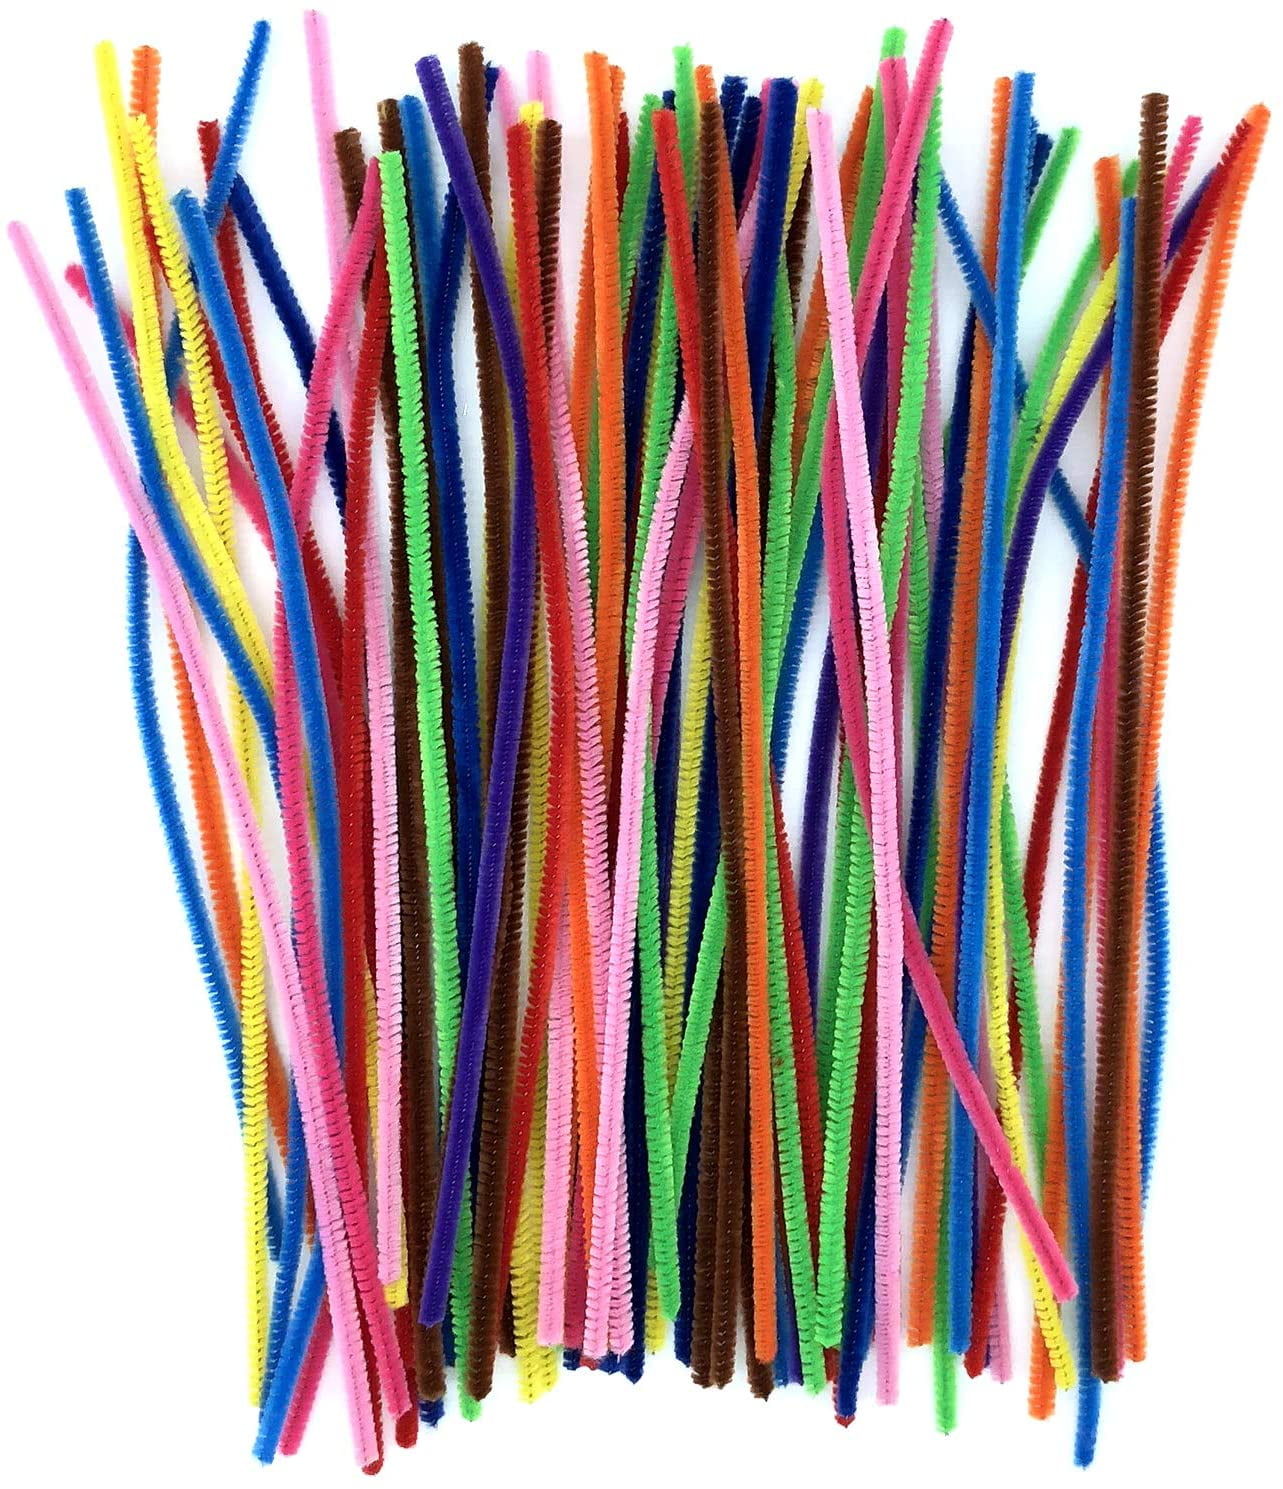 YUEAON 1020 Pieces in 34 Colors Pipe Cleaners Value Pack of Multicolor Chenille Stems for DIY Art Creative Crafts Decorations 6 mm x 12 inch 